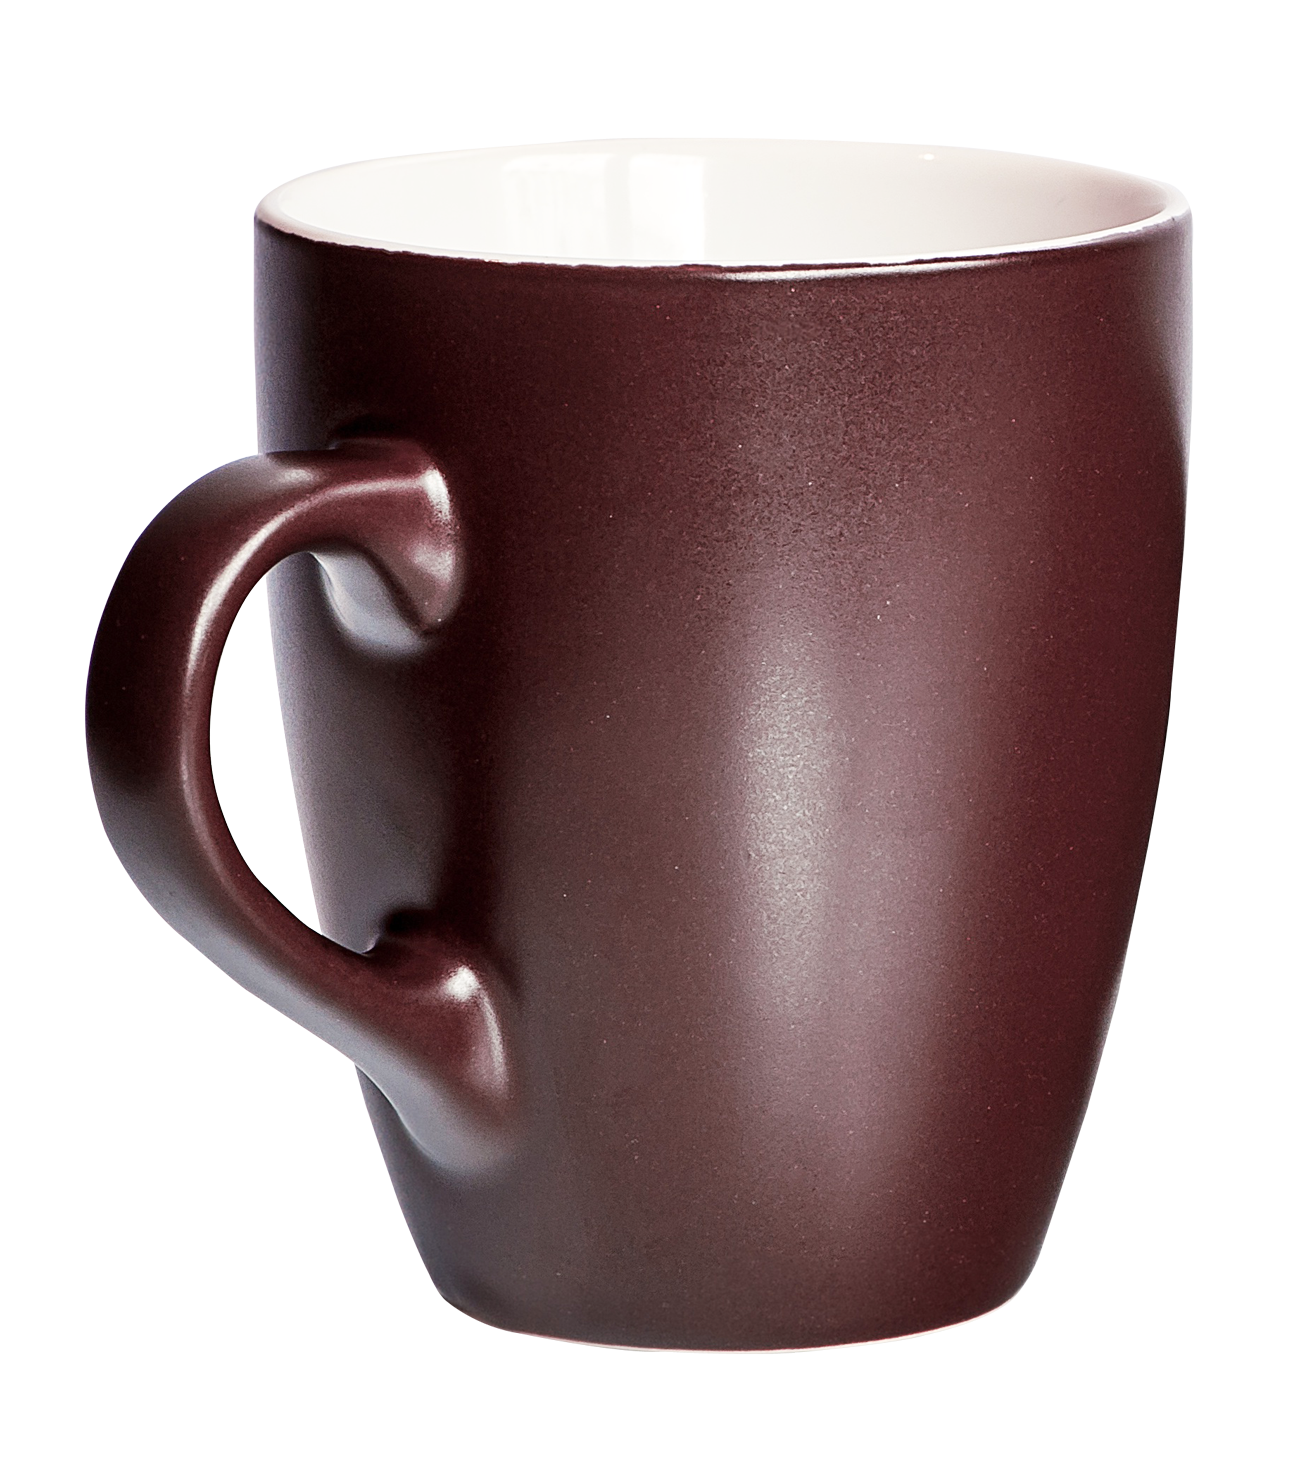 red cup PNG image